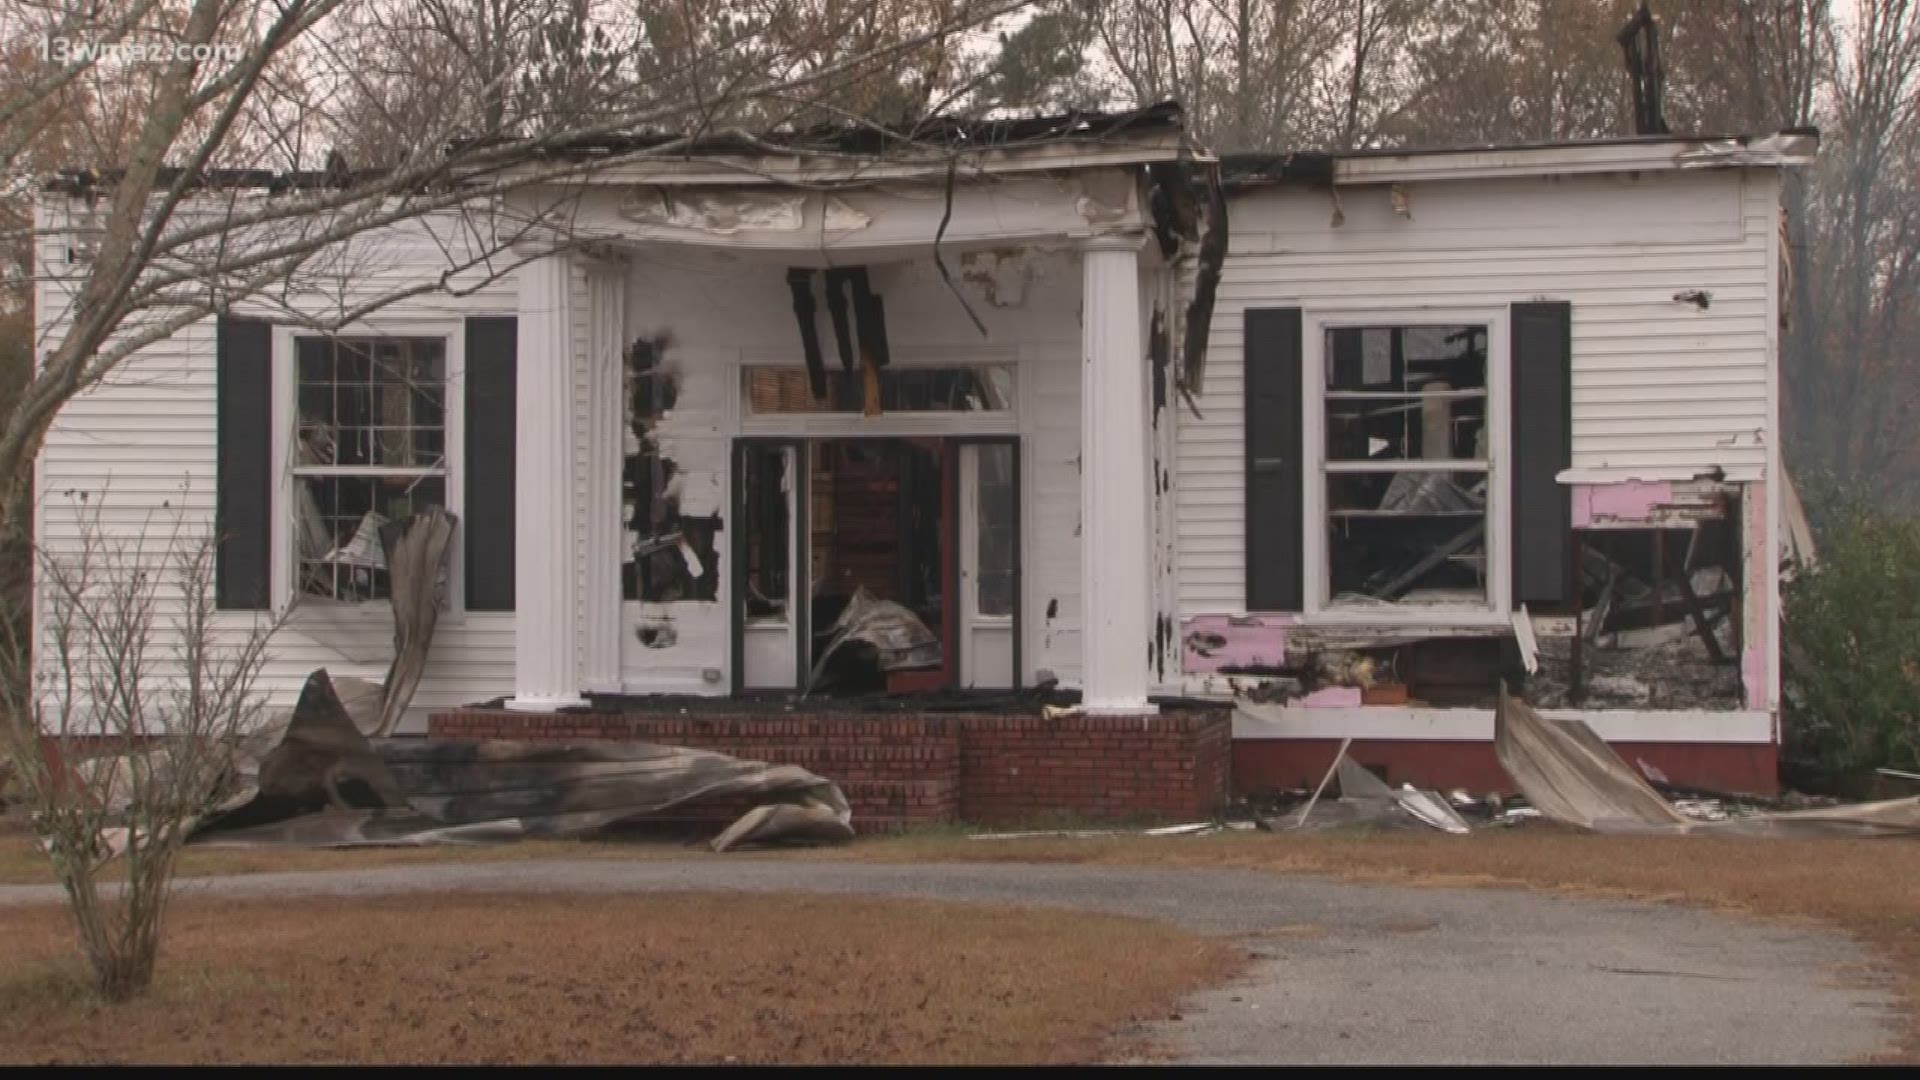 A fire roared through a Bleckley County home Friday, and some people want to know why the county and the city fire department did not work together to put it out.